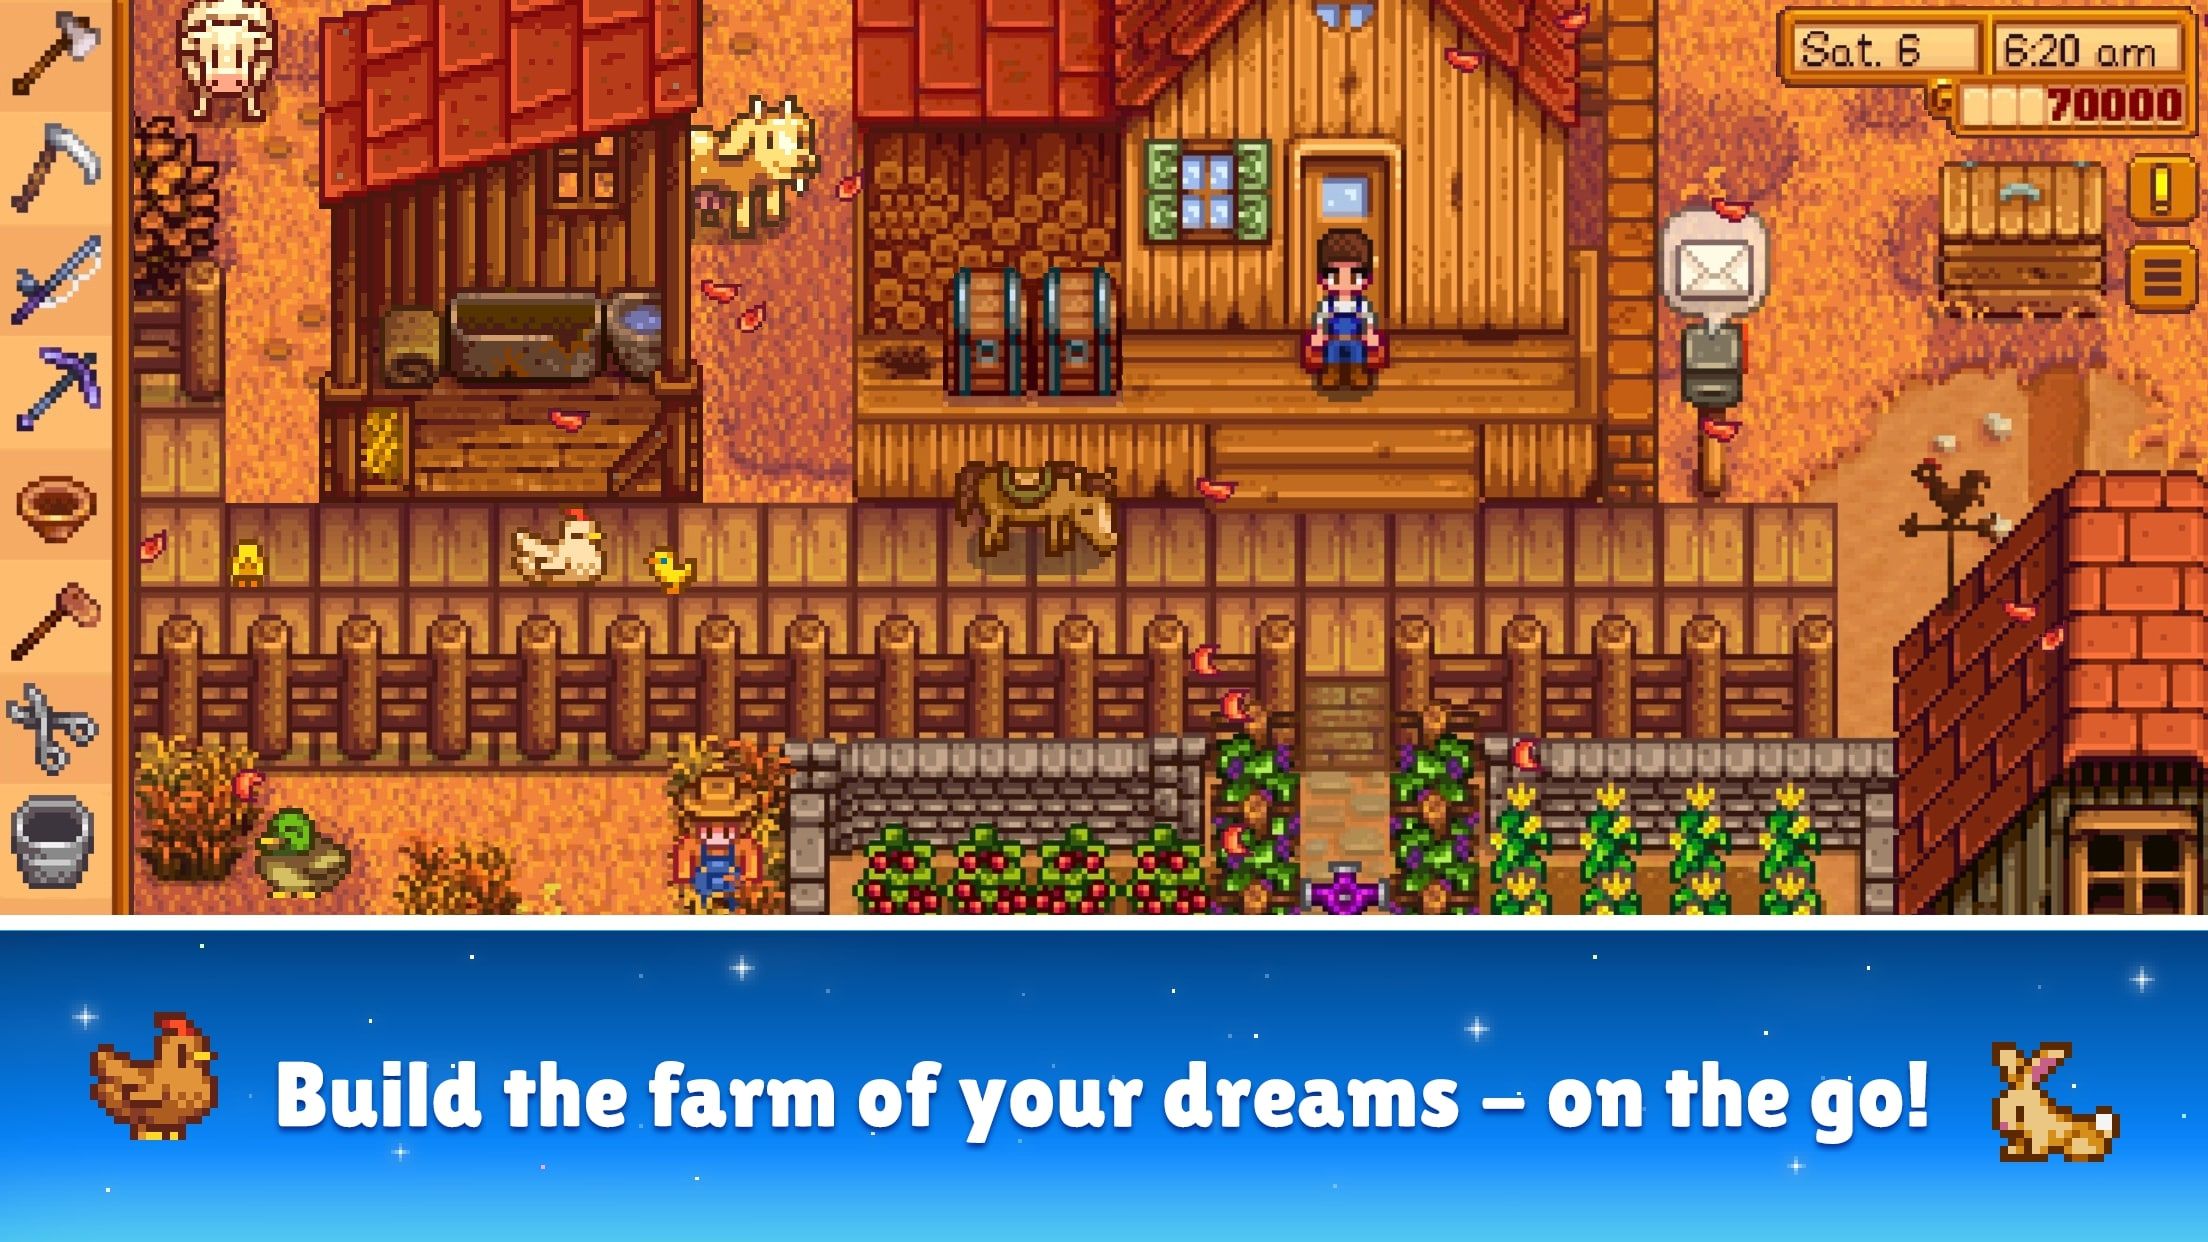 Stardew Valley showing a character next to their house